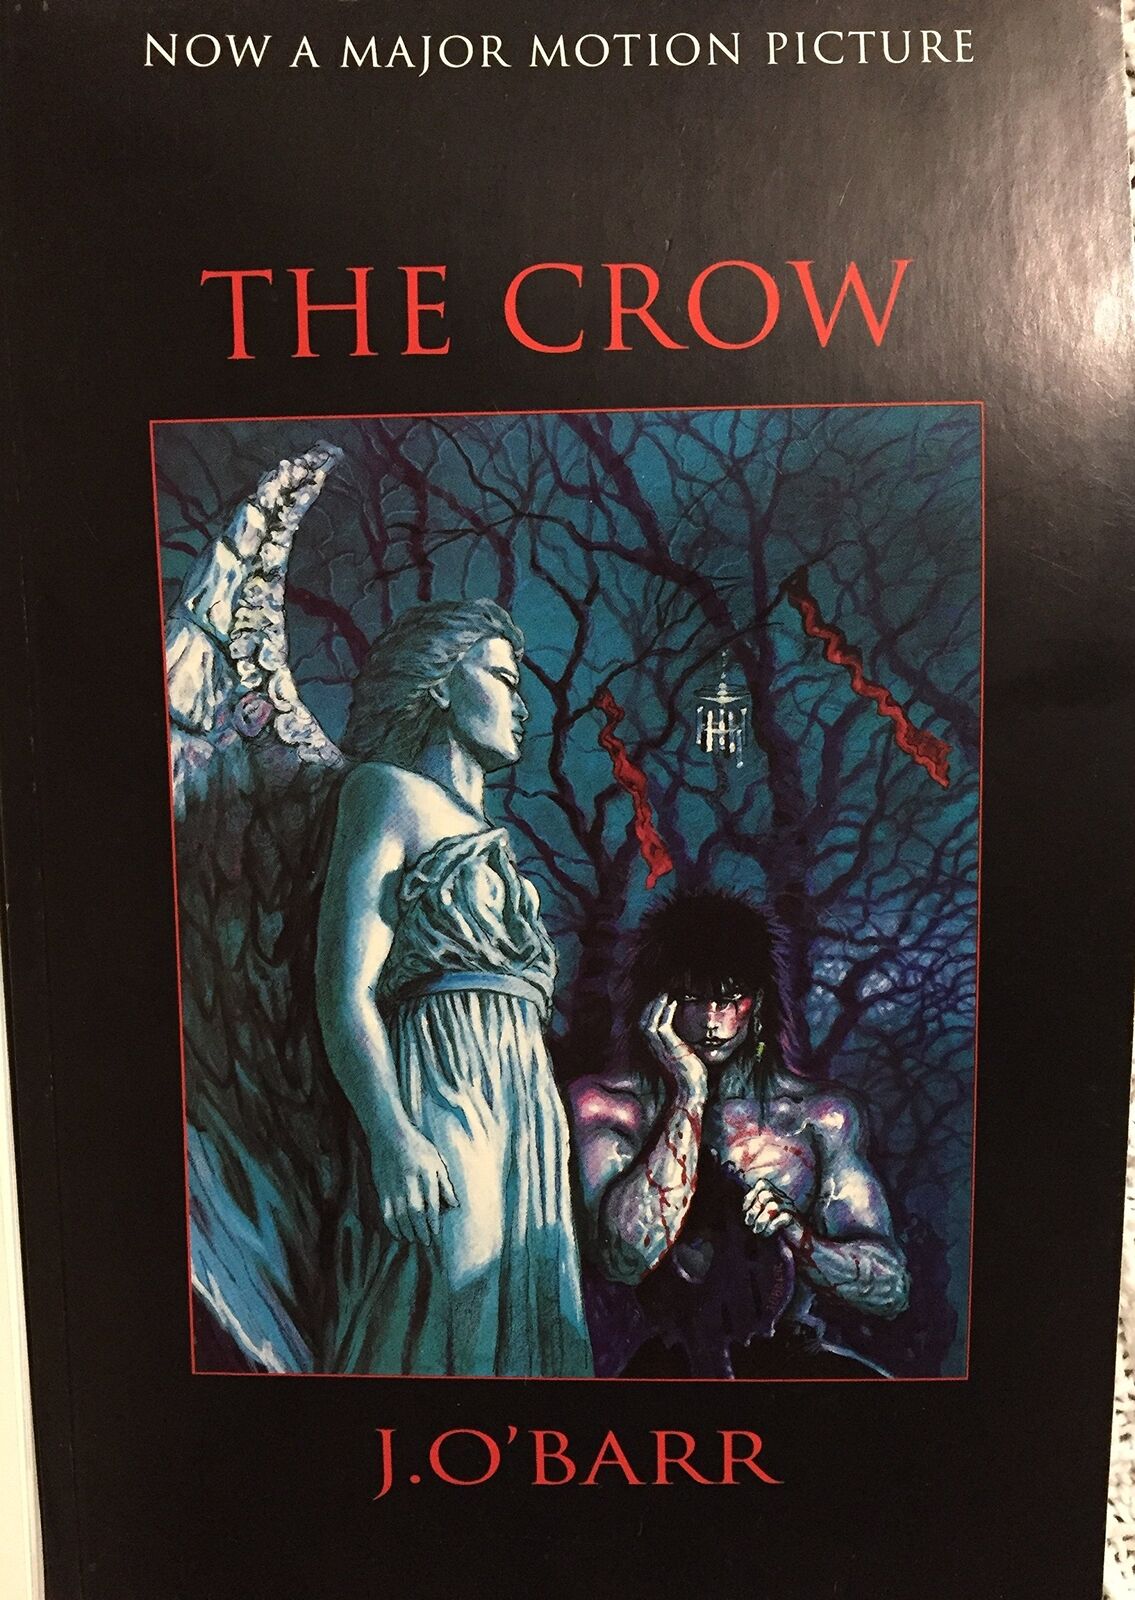 The Crow by O'Barr (paperback)